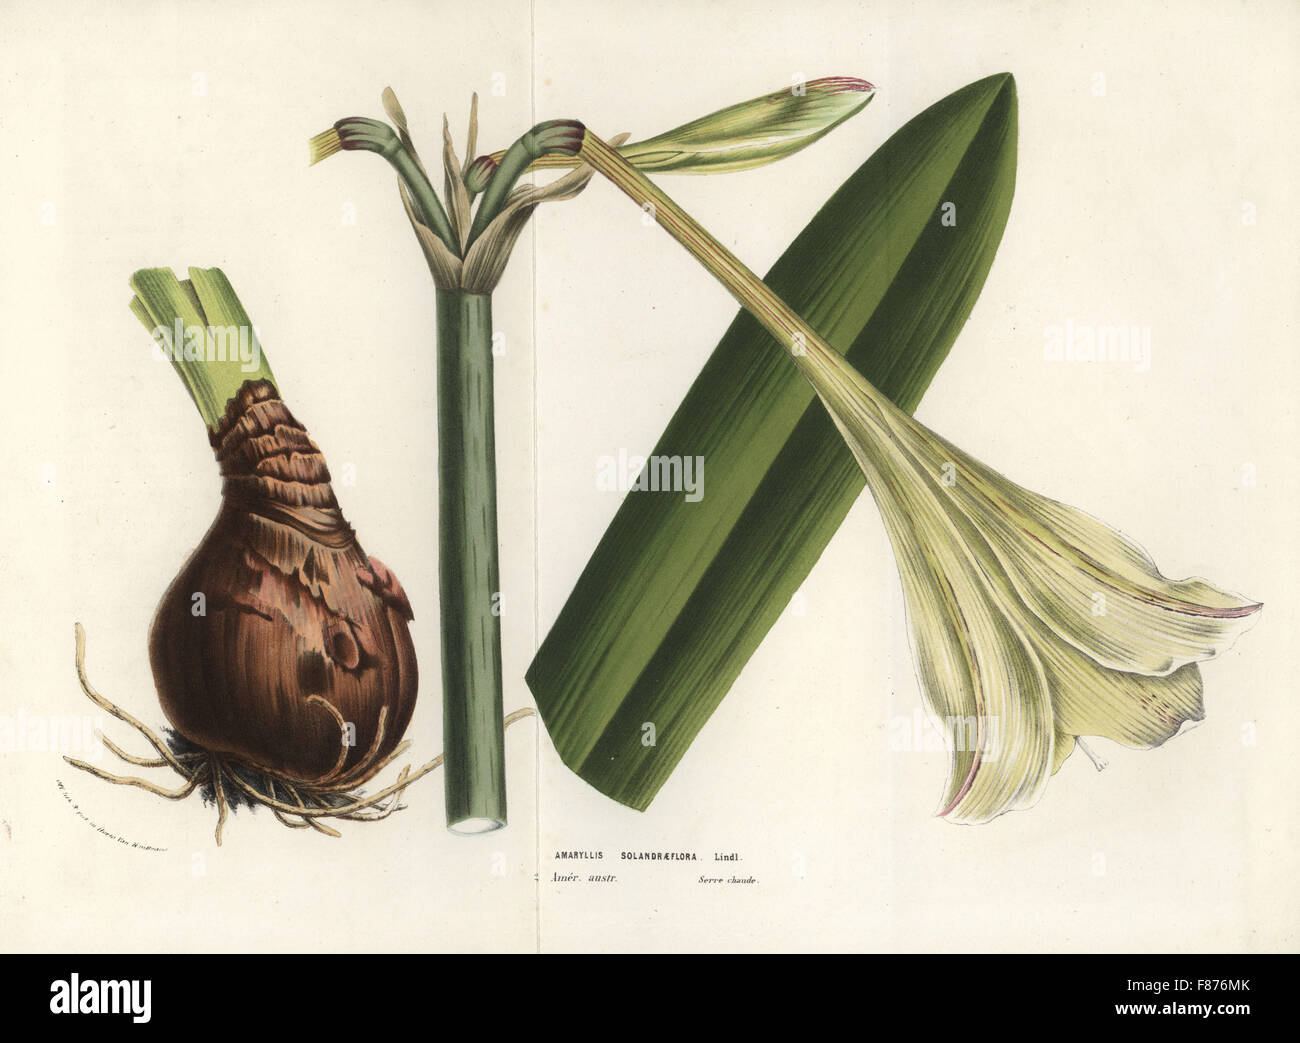 Hippeastrum elegans (Amaryllis solandraeflora). Handcoloured lithograph from Louis van Houtte and Charles Lemaire's Flowers of the Gardens and Hothouses of Europe, Flore des Serres et des Jardins de l'Europe, Ghent, Belgium, 1856. Stock Photo